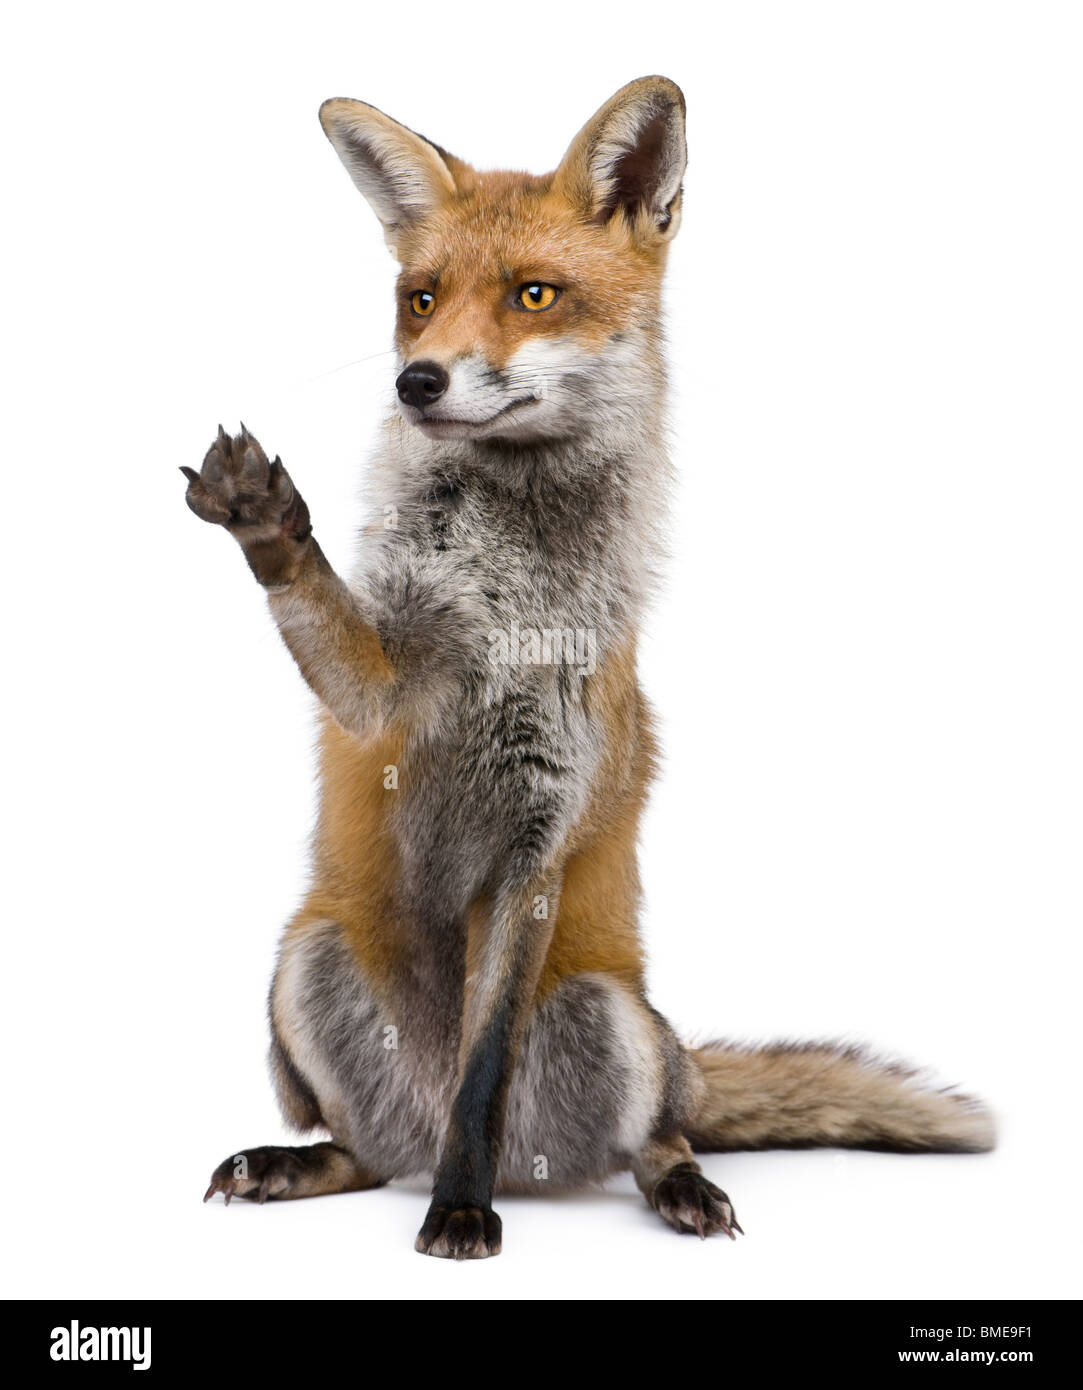 Red Fox, 1 year old, sitting with paw raised in front of white background Stock Photo